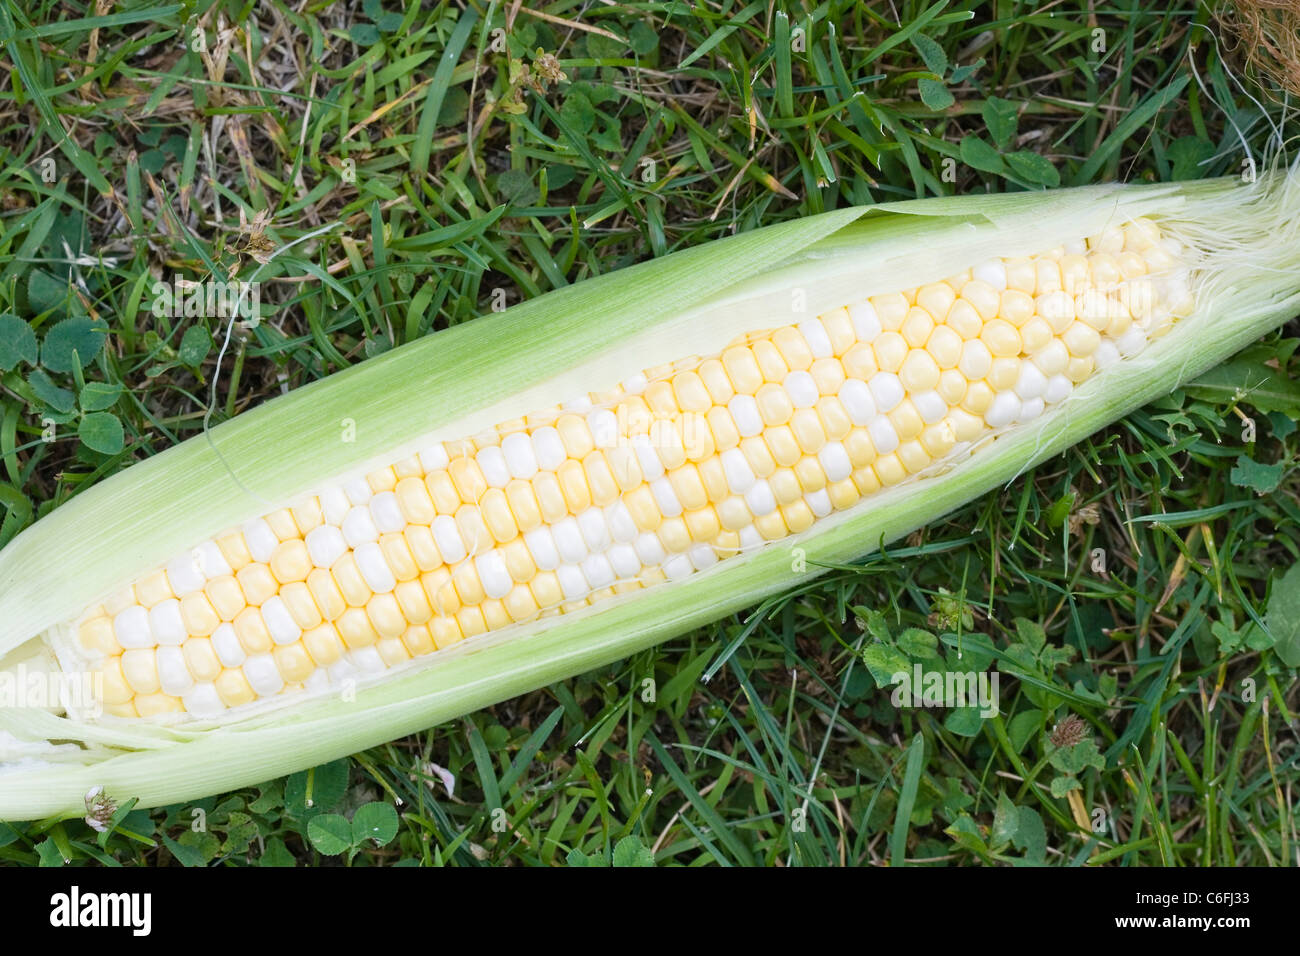 a partially shucked ear of fresh sweet corn on the grass Stock Photo